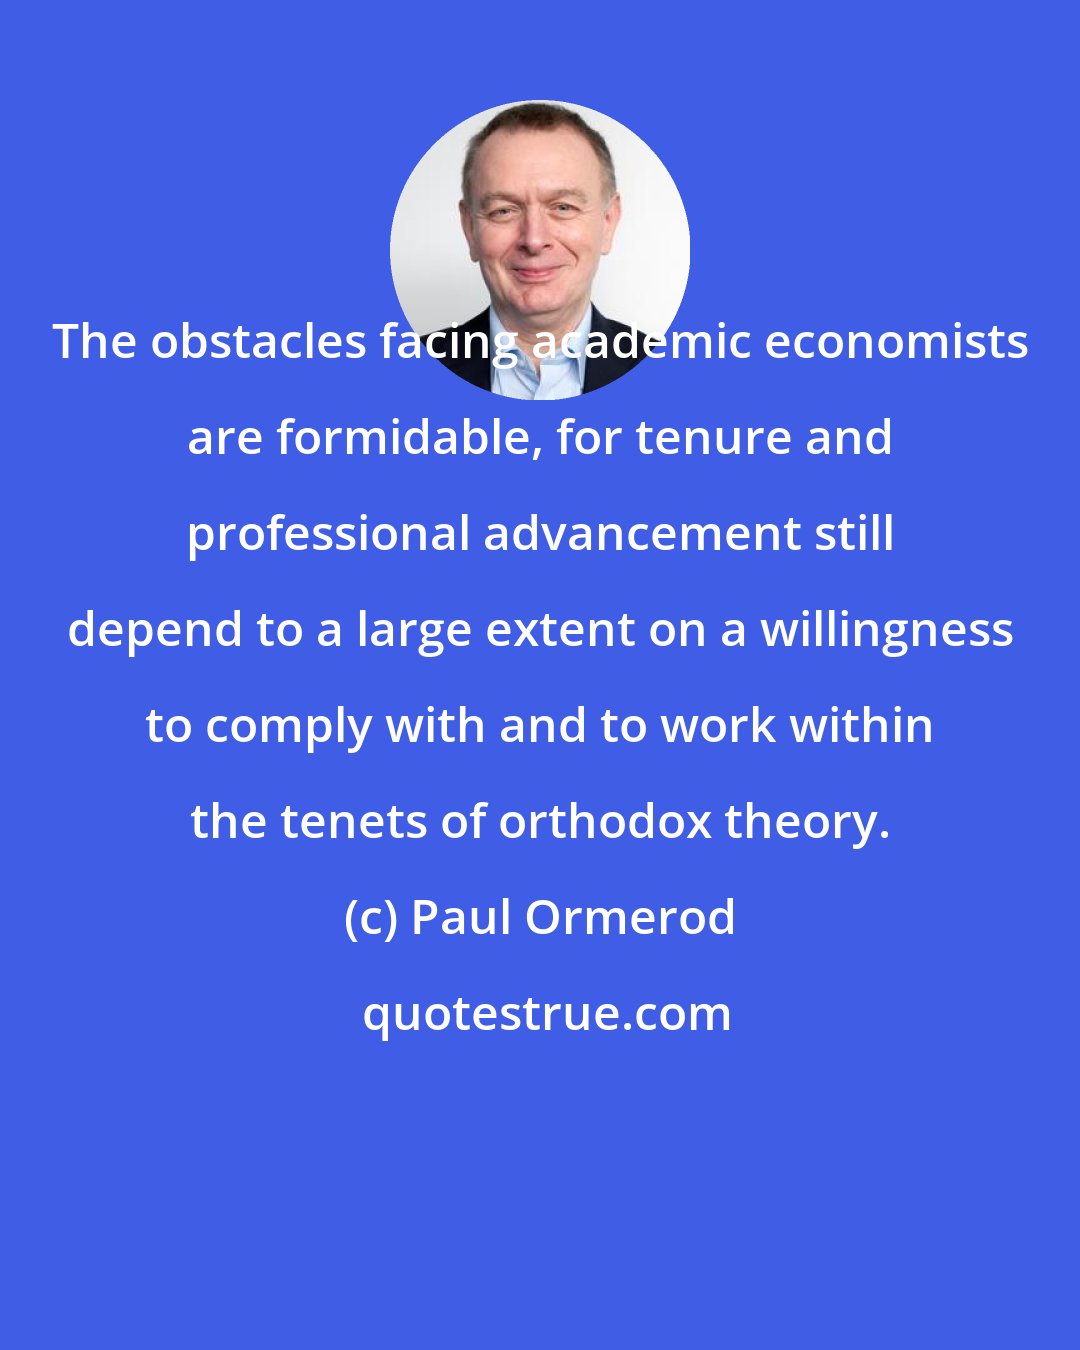 Paul Ormerod: The obstacles facing academic economists are formidable, for tenure and professional advancement still depend to a large extent on a willingness to comply with and to work within the tenets of orthodox theory.